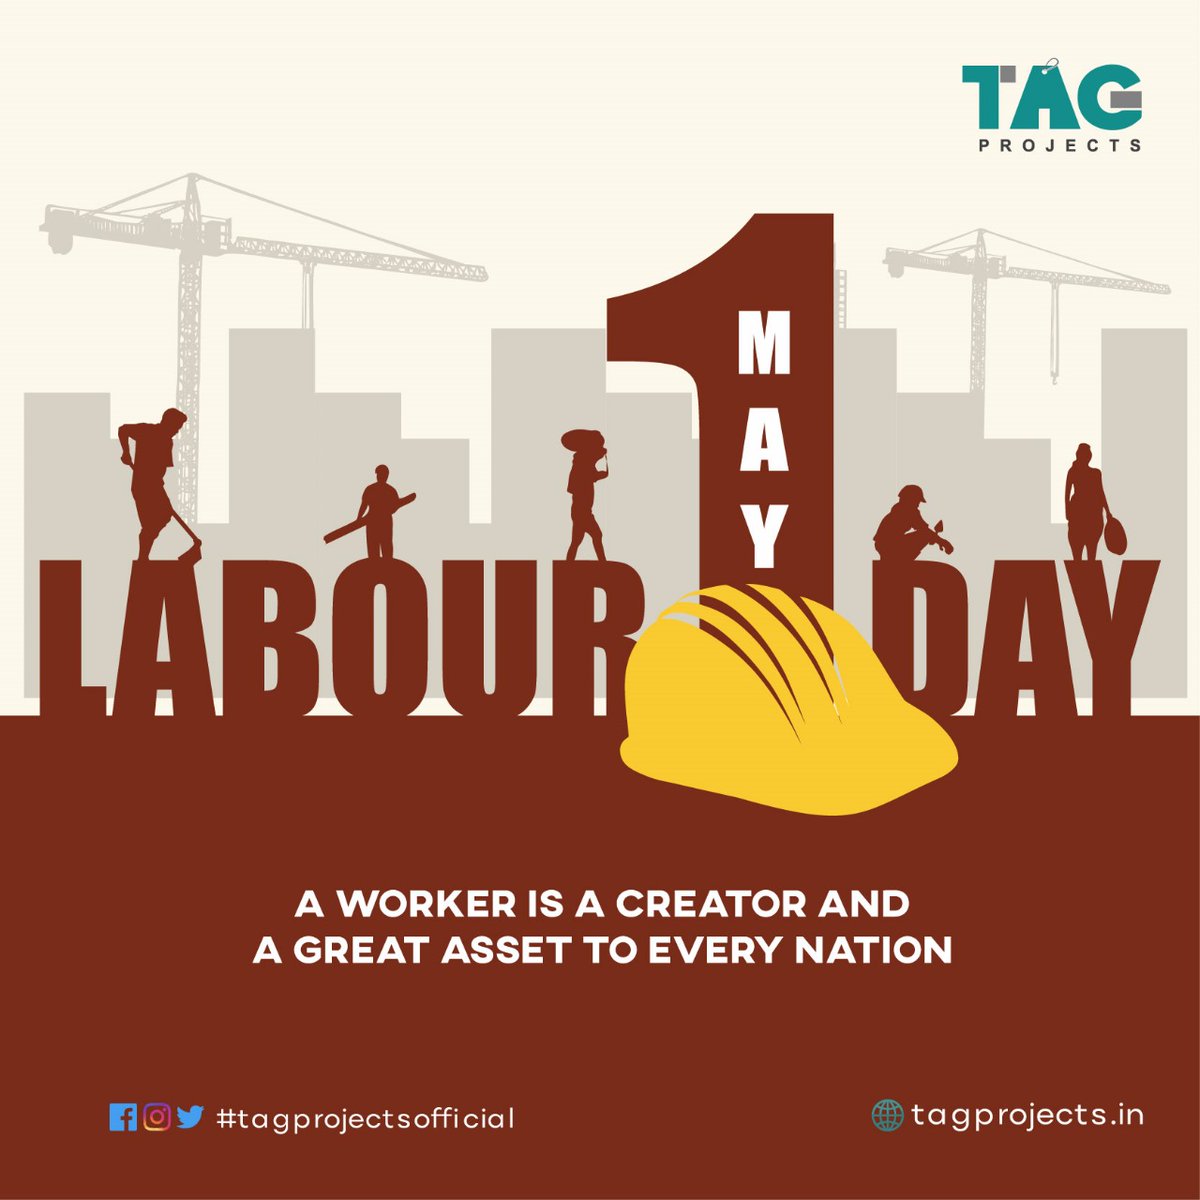 Happy International Labour Day from TAGprojects!

Your dedication powers our progress.

#InternationalWorkersDay #labourday #TAGprojects #InternationalLabourDay #mayday #happylabourday #HappyWorkersDay #hardworkpaysoff #workersrights #dedication #LabourDay2024 #May1st